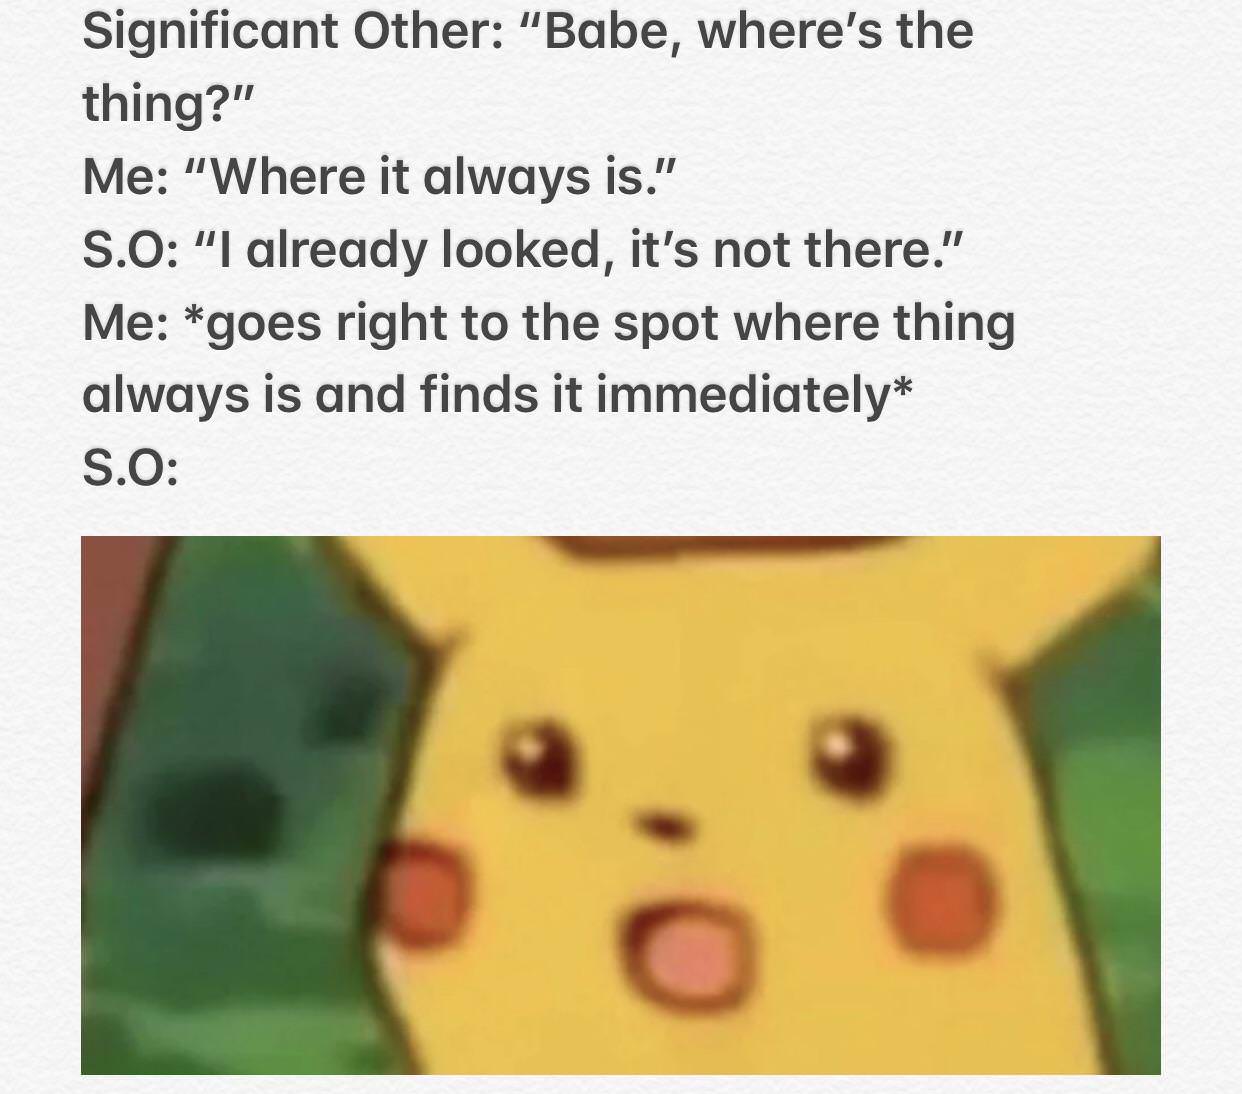 funny meme of pikachu shocked - Significant Other "Babe, where's the thing?" Me "Where it always is." S.O "I already looked, it's not there." Me goes right to the spot where thing always is and finds it immediately S.O